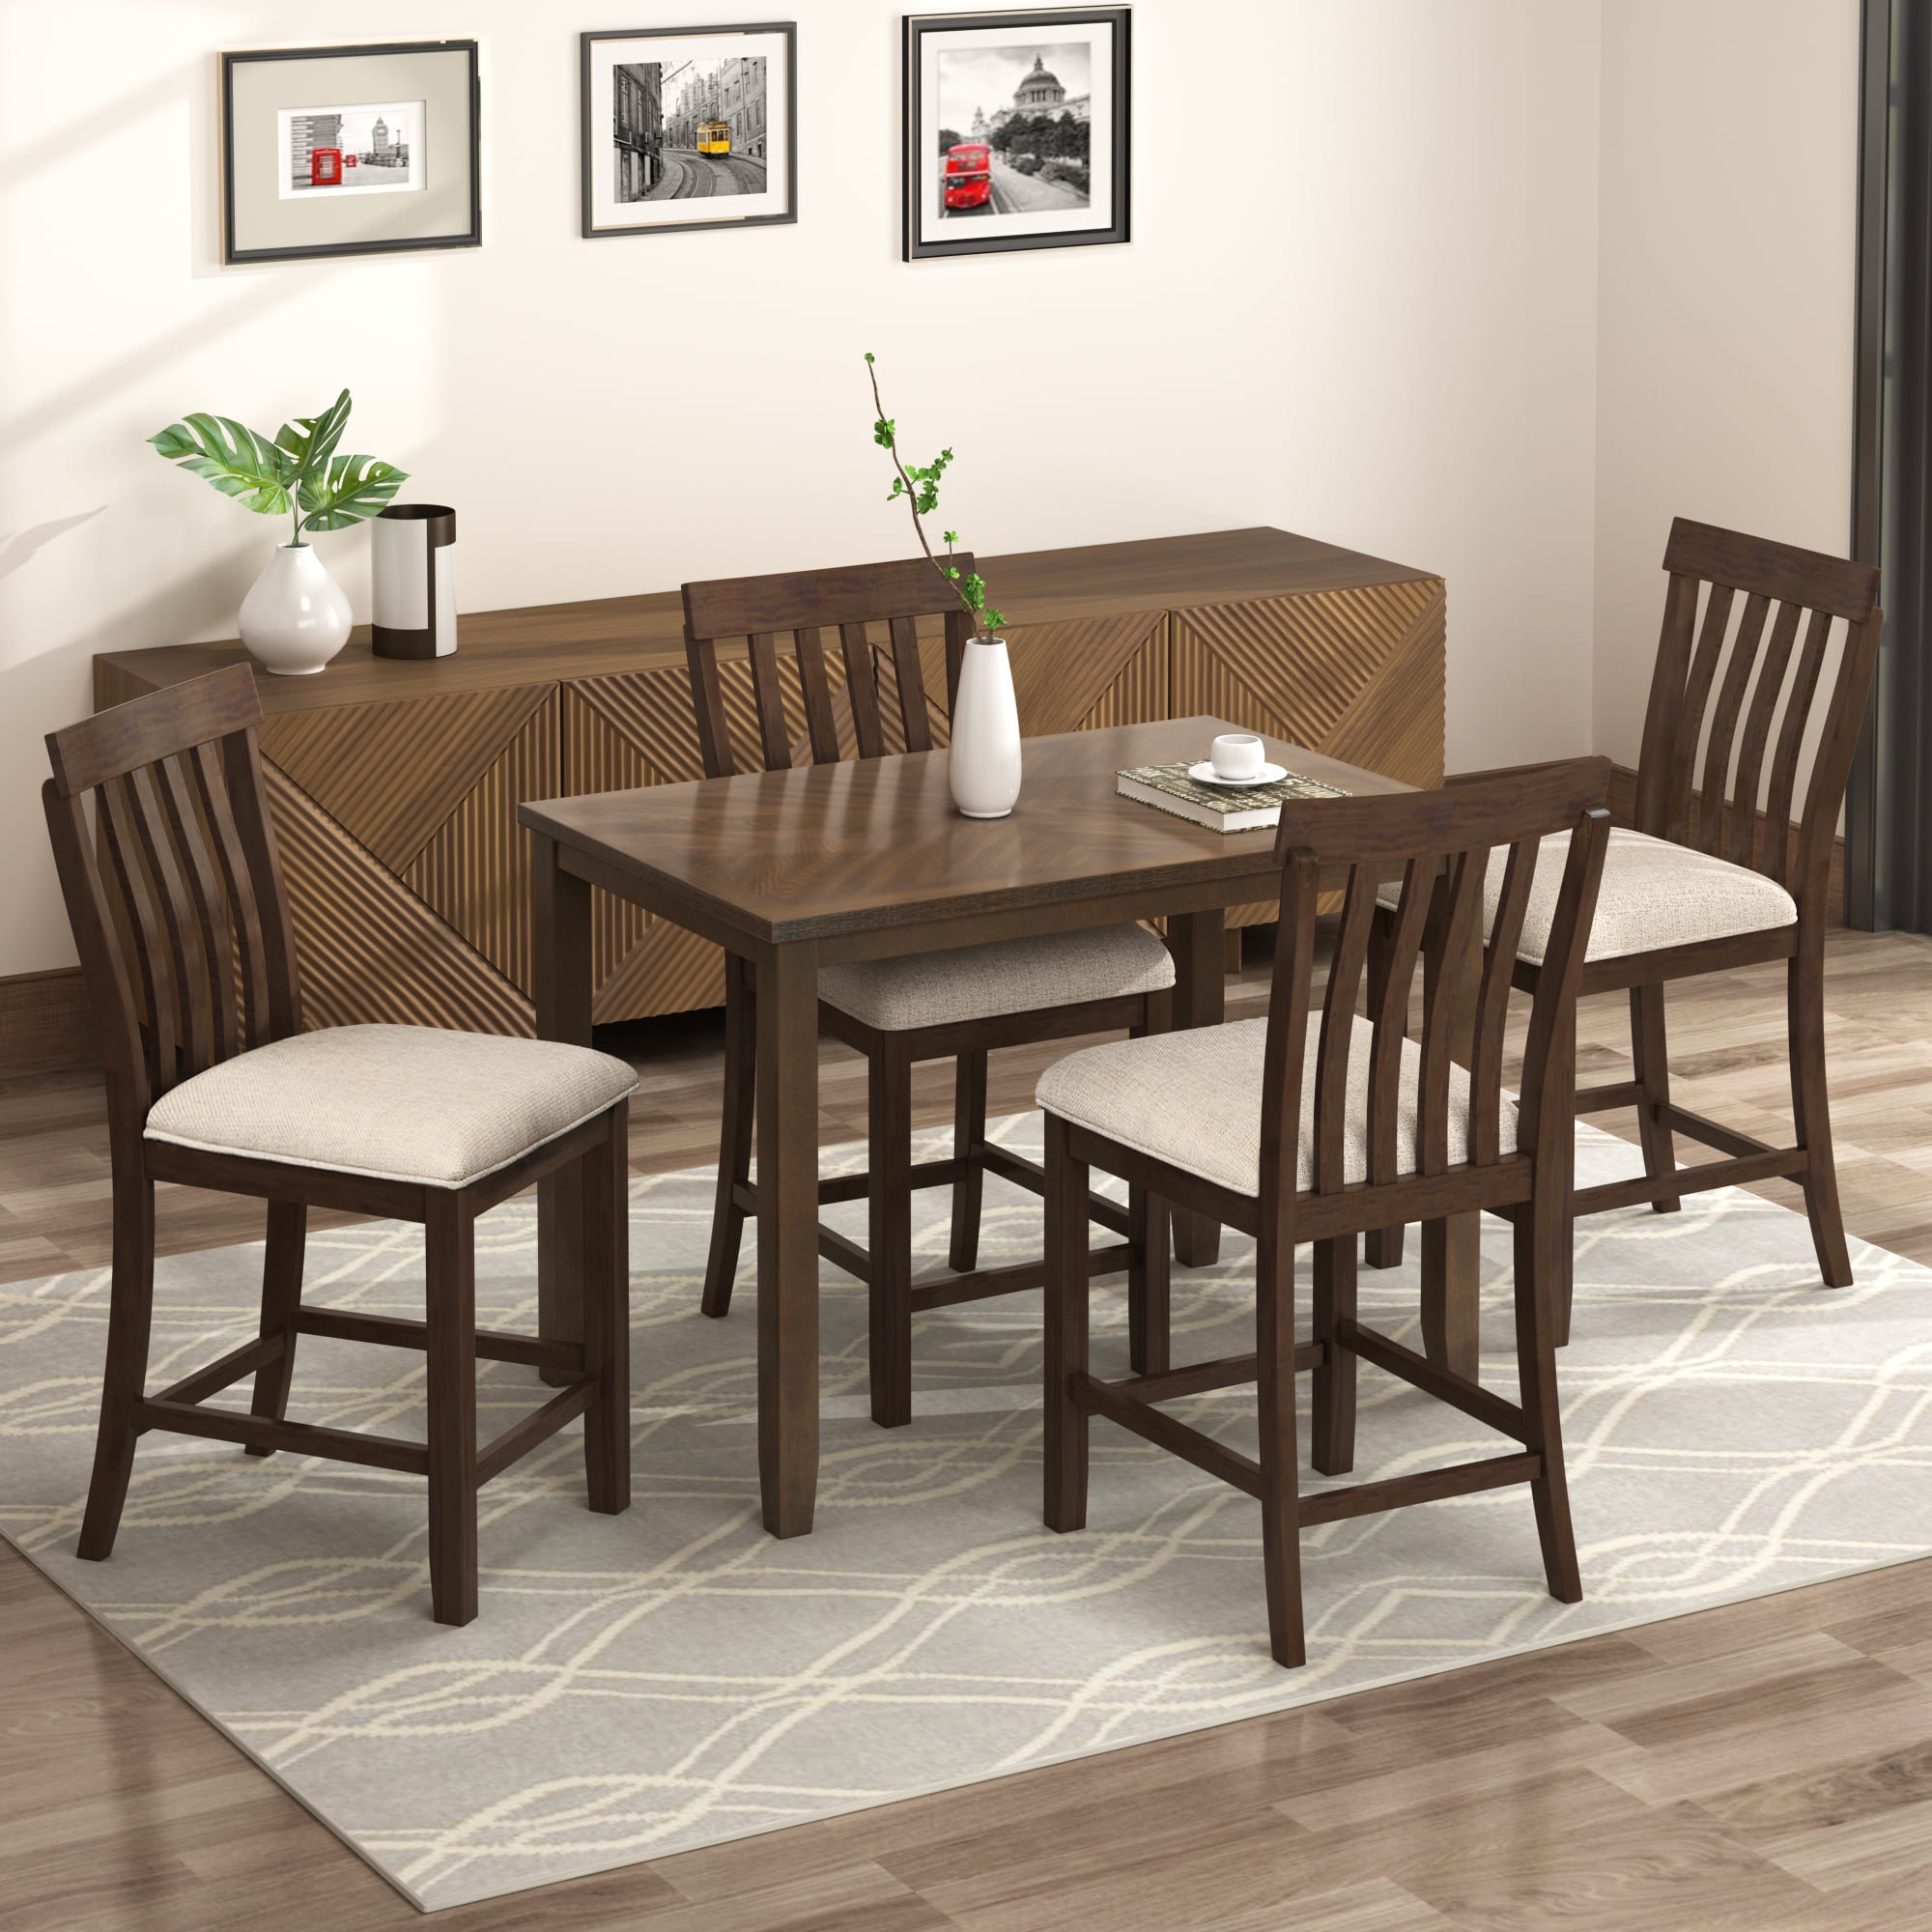 Dining Table Sets For 4 Persons 5, Cream Colored Dining Room Chair Cushions